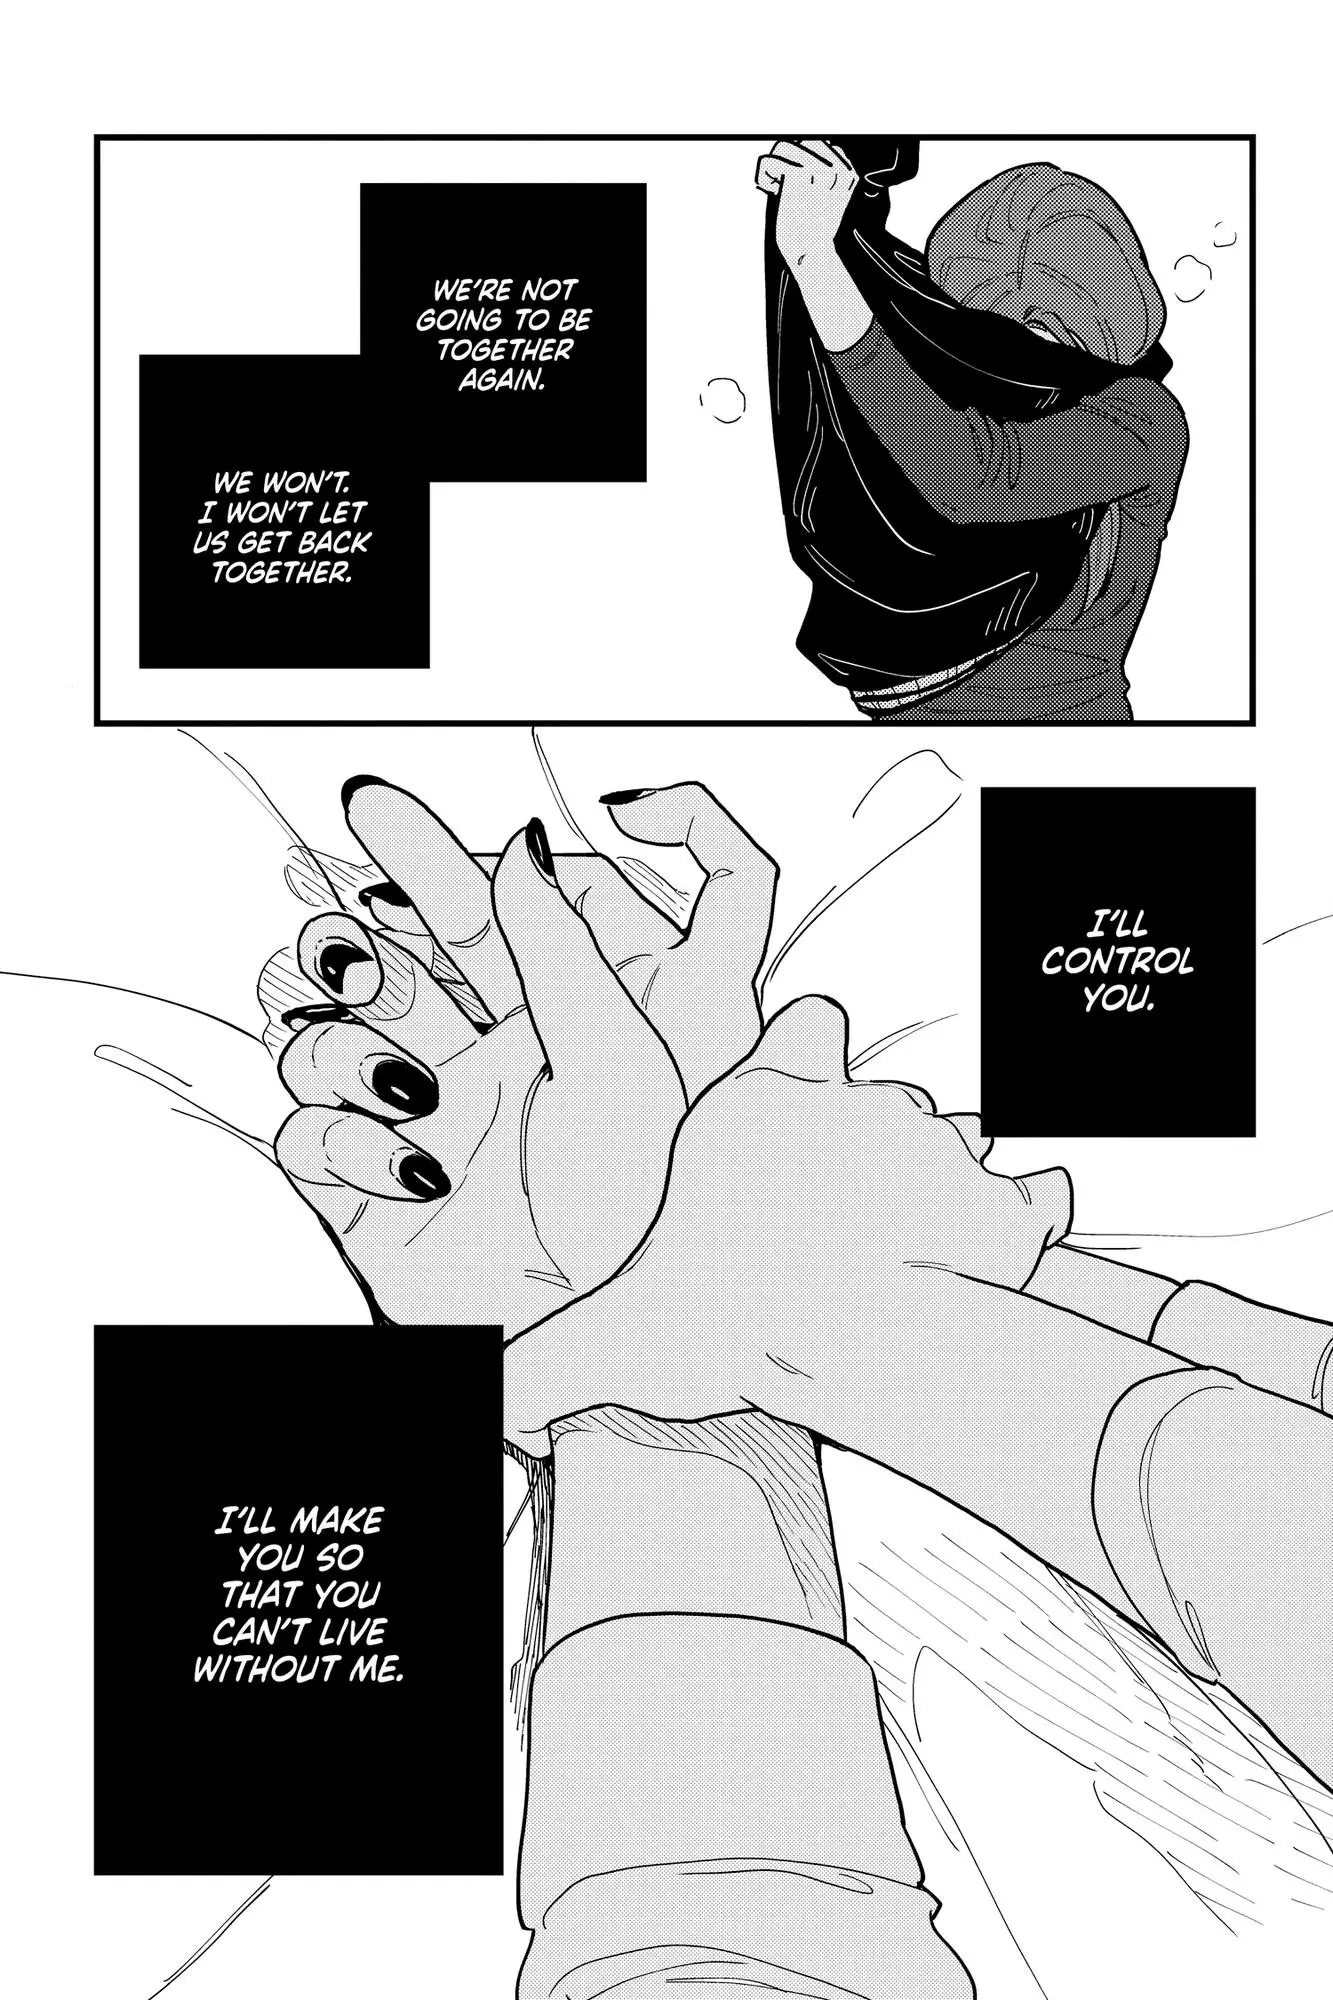 So, Do You Wanna Go Out, Or? - 44 page 24-7f16fed9